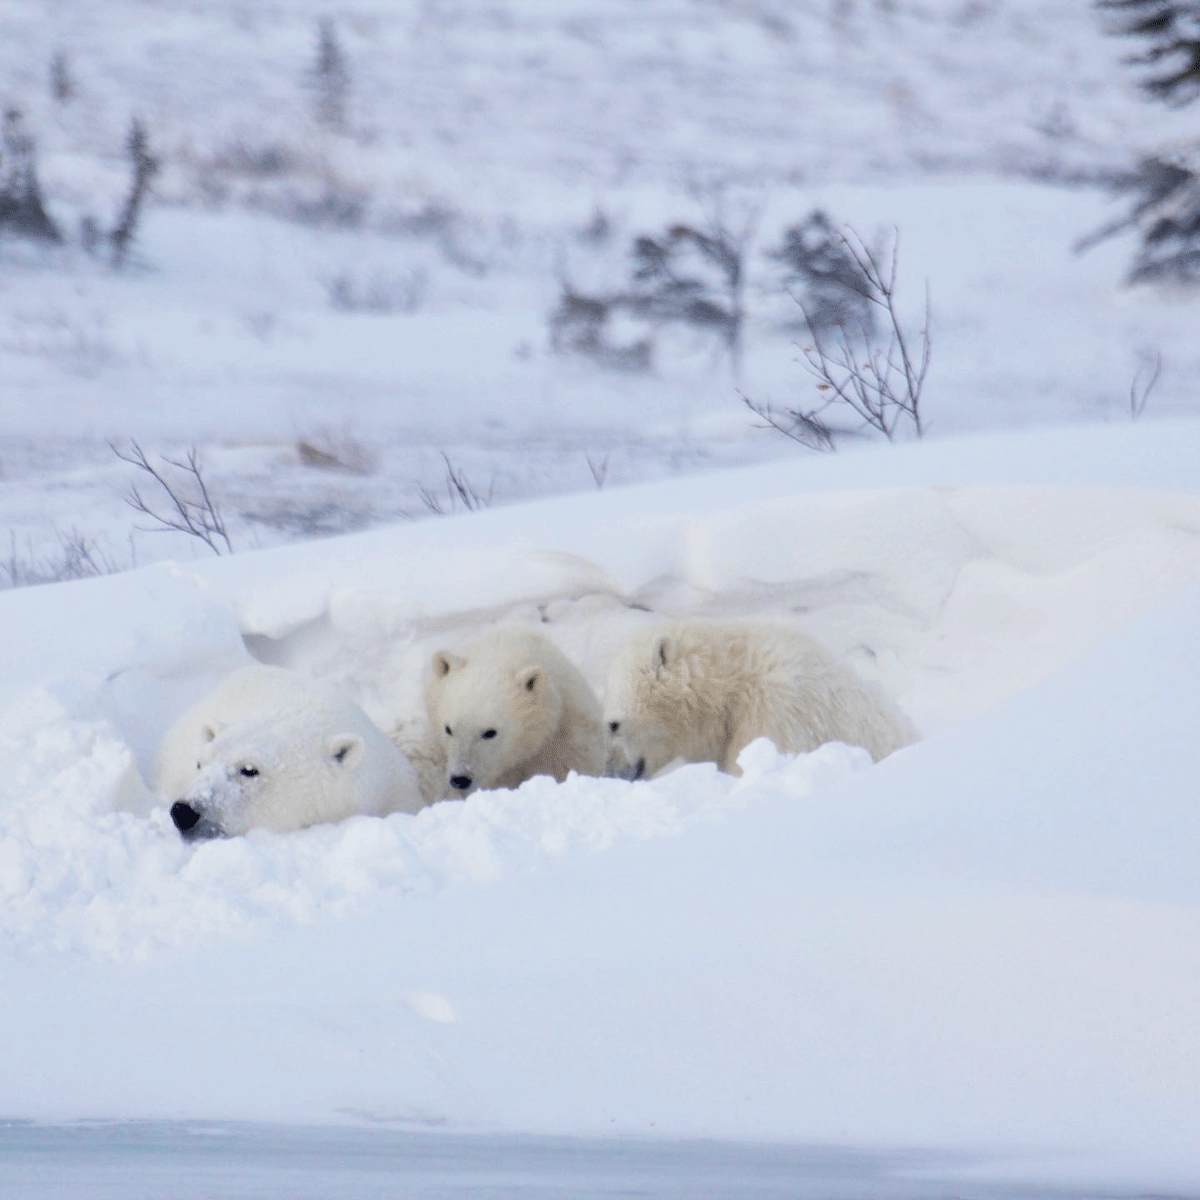 Mom and cubs resting. Great Ice Bear Adventure. Dymond Lake Ecolodge. Eduard Planting photo.